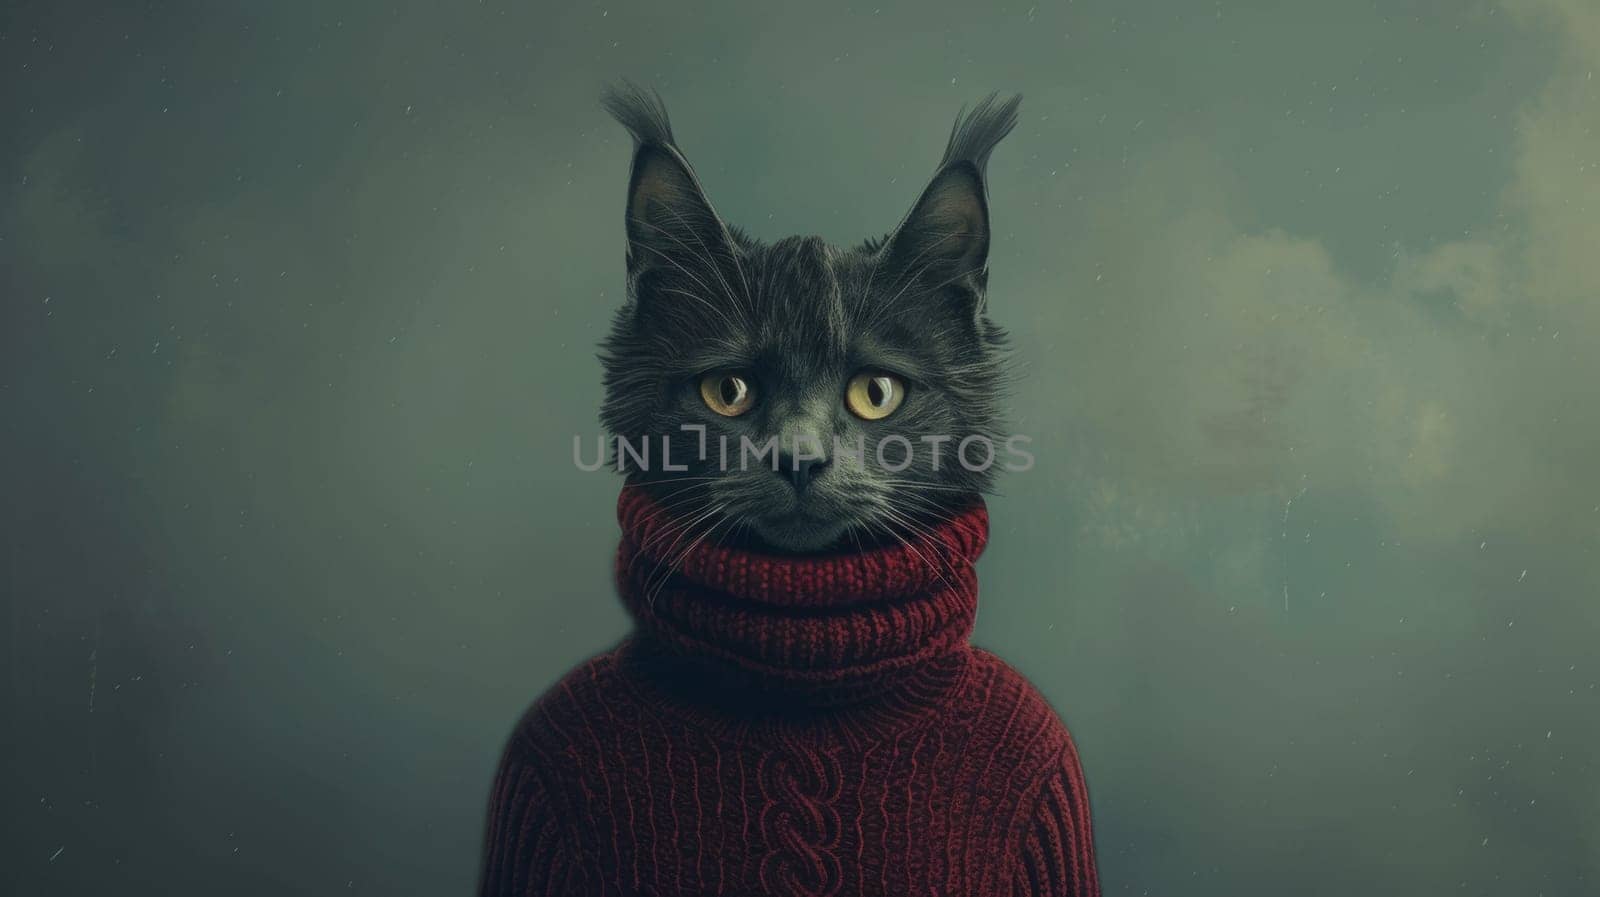 A black cat wearing a red sweater with an evil look on its face